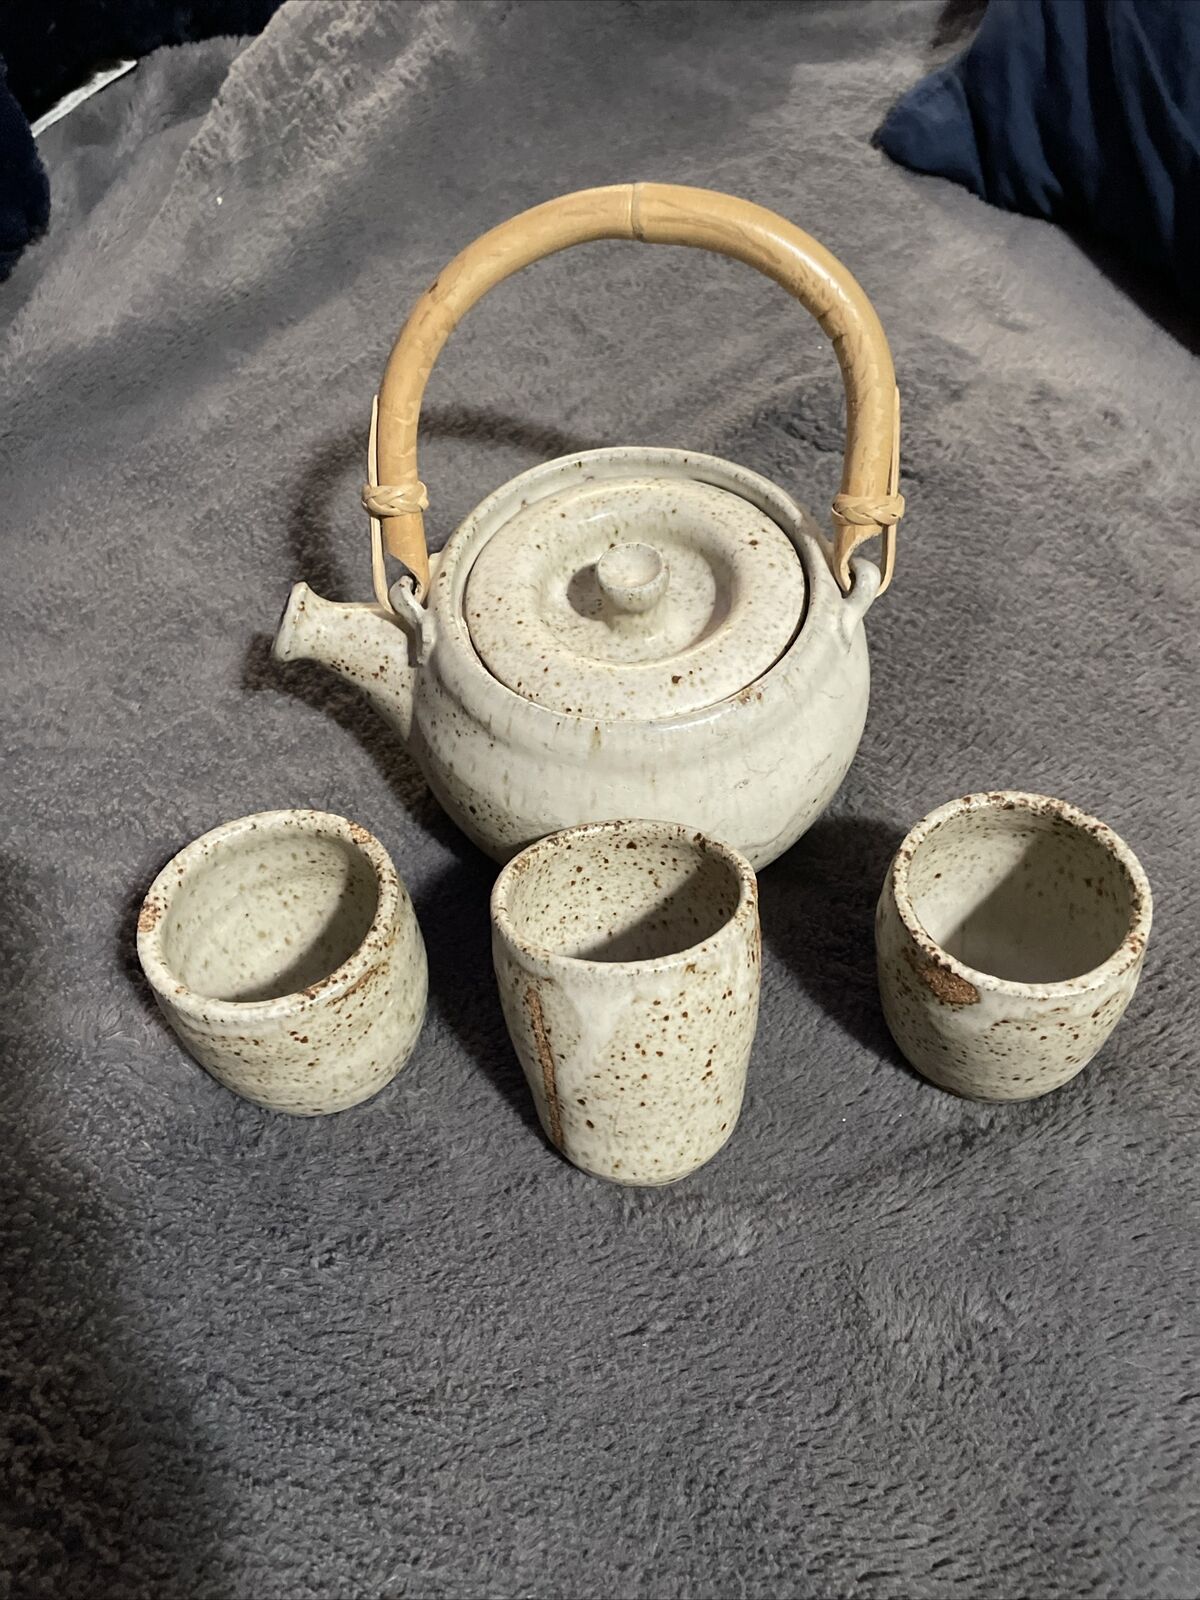 Super Cool Hand Made Stoneware Tea Pot Set With Bamboo Handle.